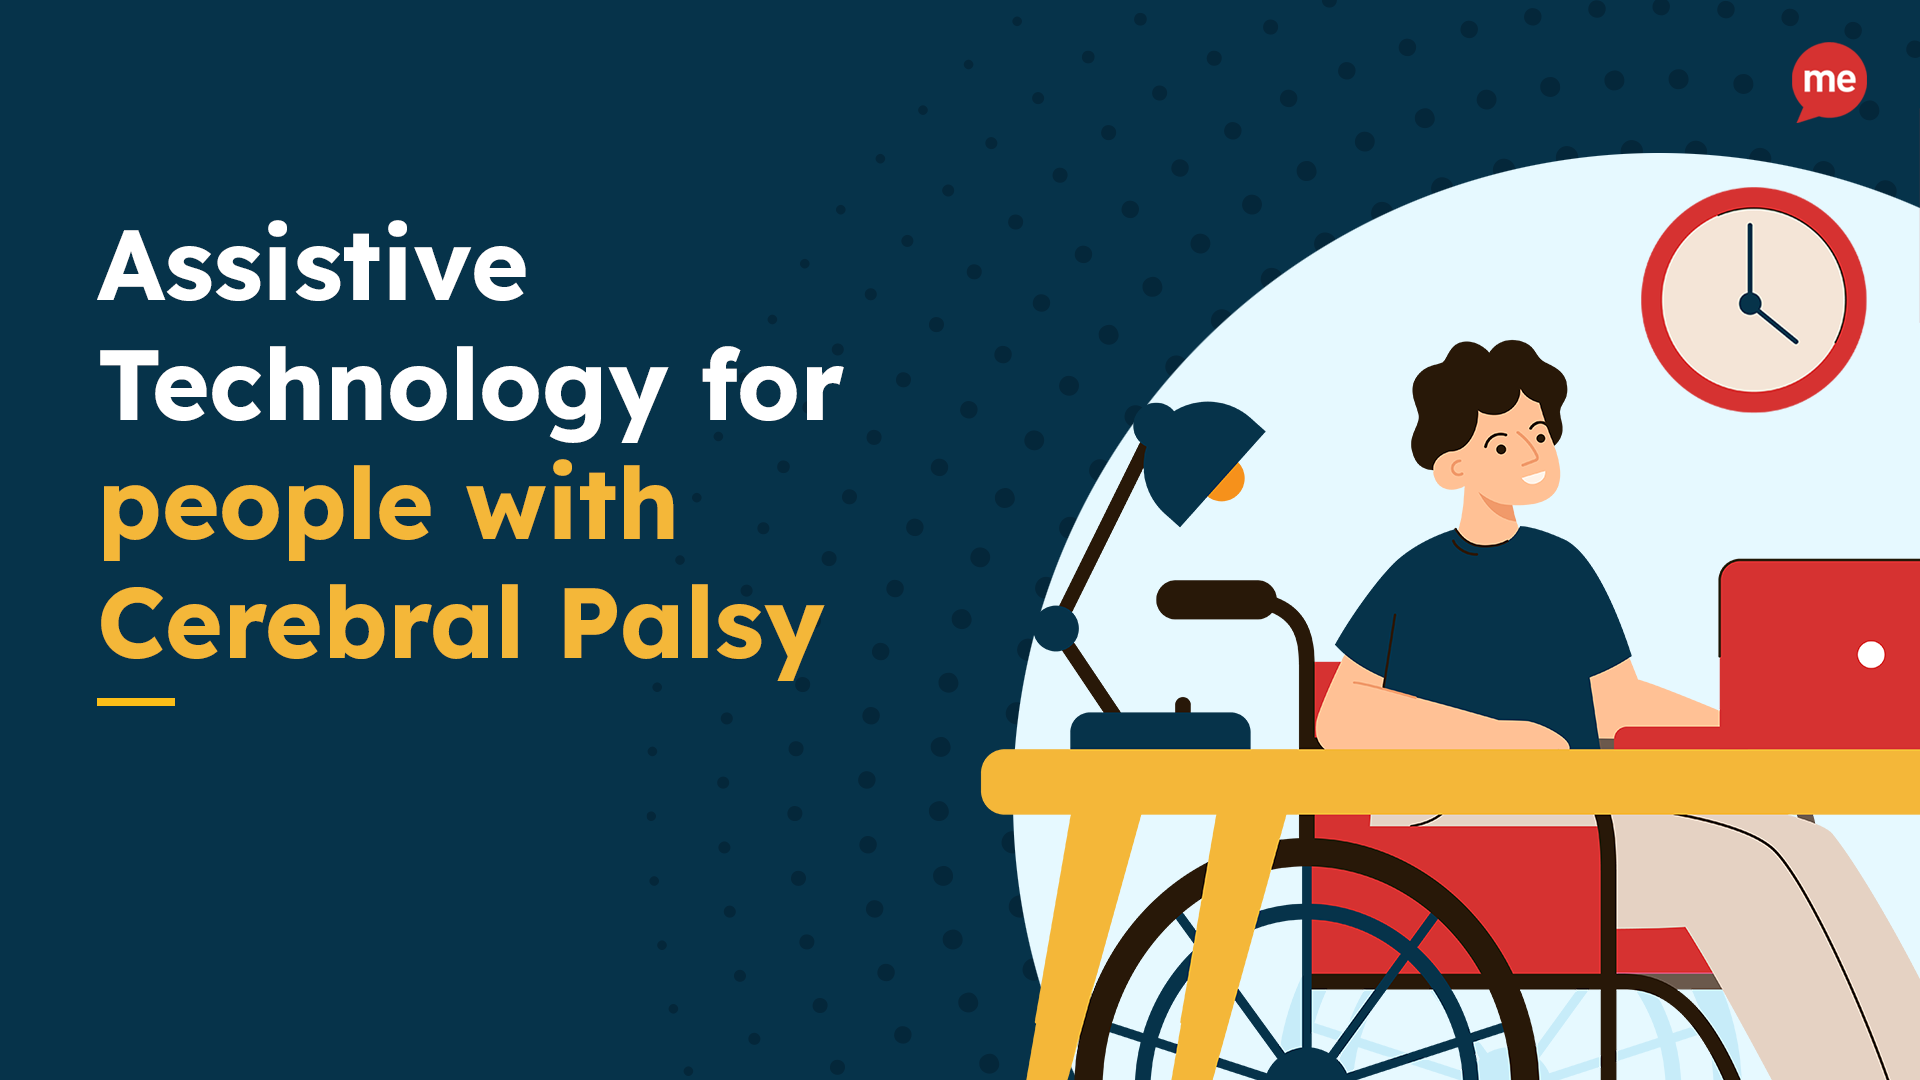 Assistive Technology for people with Cerebral Palsy